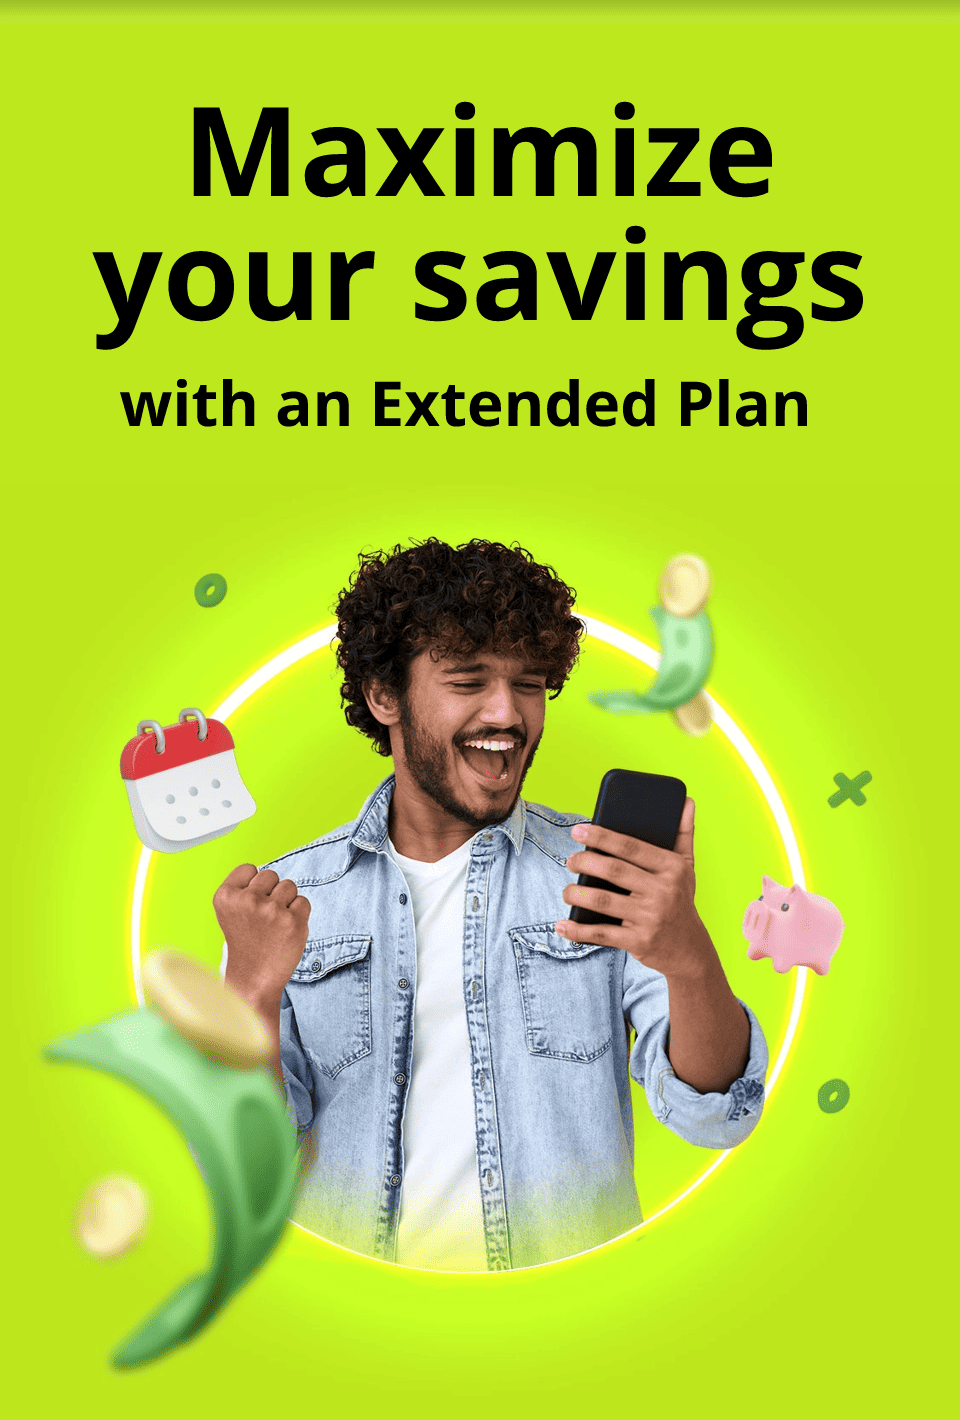 Maximize your savings - with an Extended Plan